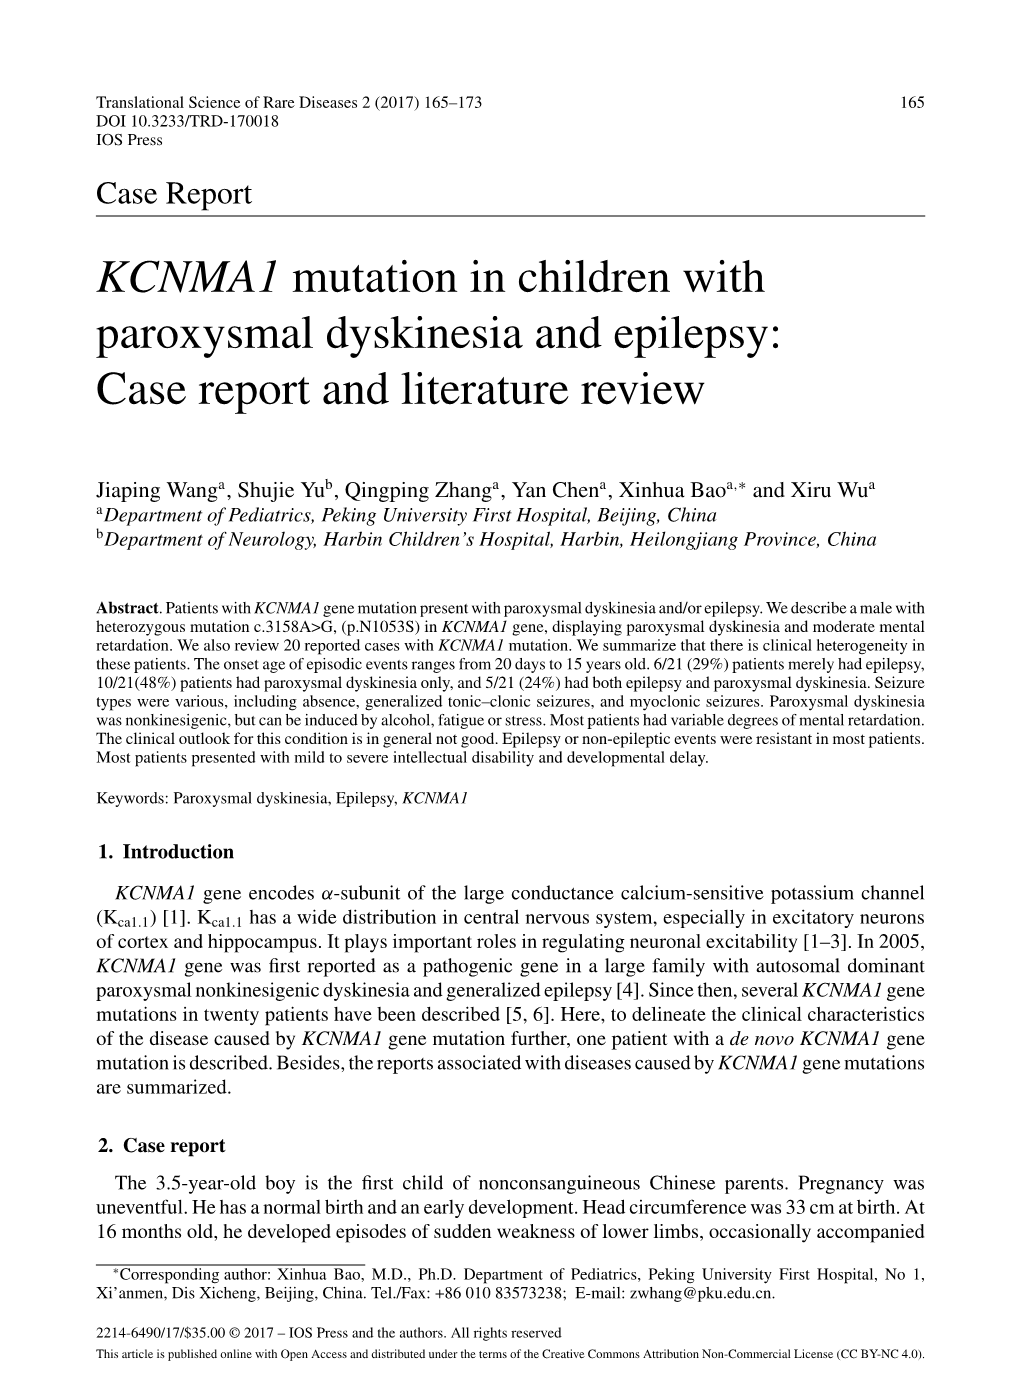 KCNMA1 Mutation in Children with Paroxysmal Dyskinesia and Epilepsy: Case Report and Literature Review